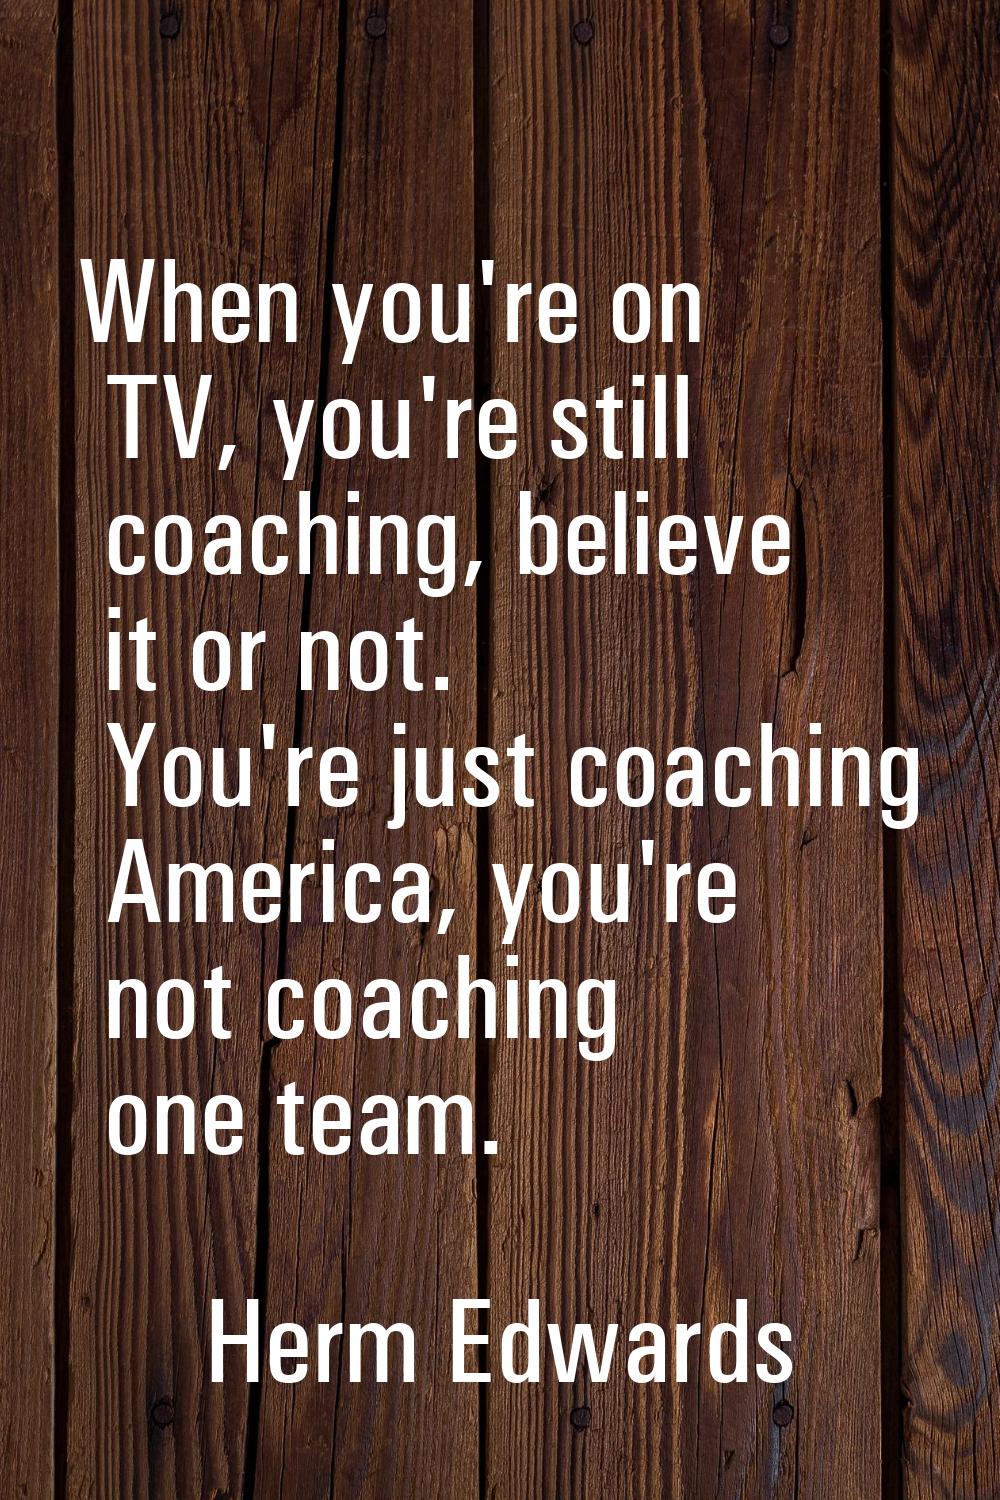 When you're on TV, you're still coaching, believe it or not. You're just coaching America, you're n